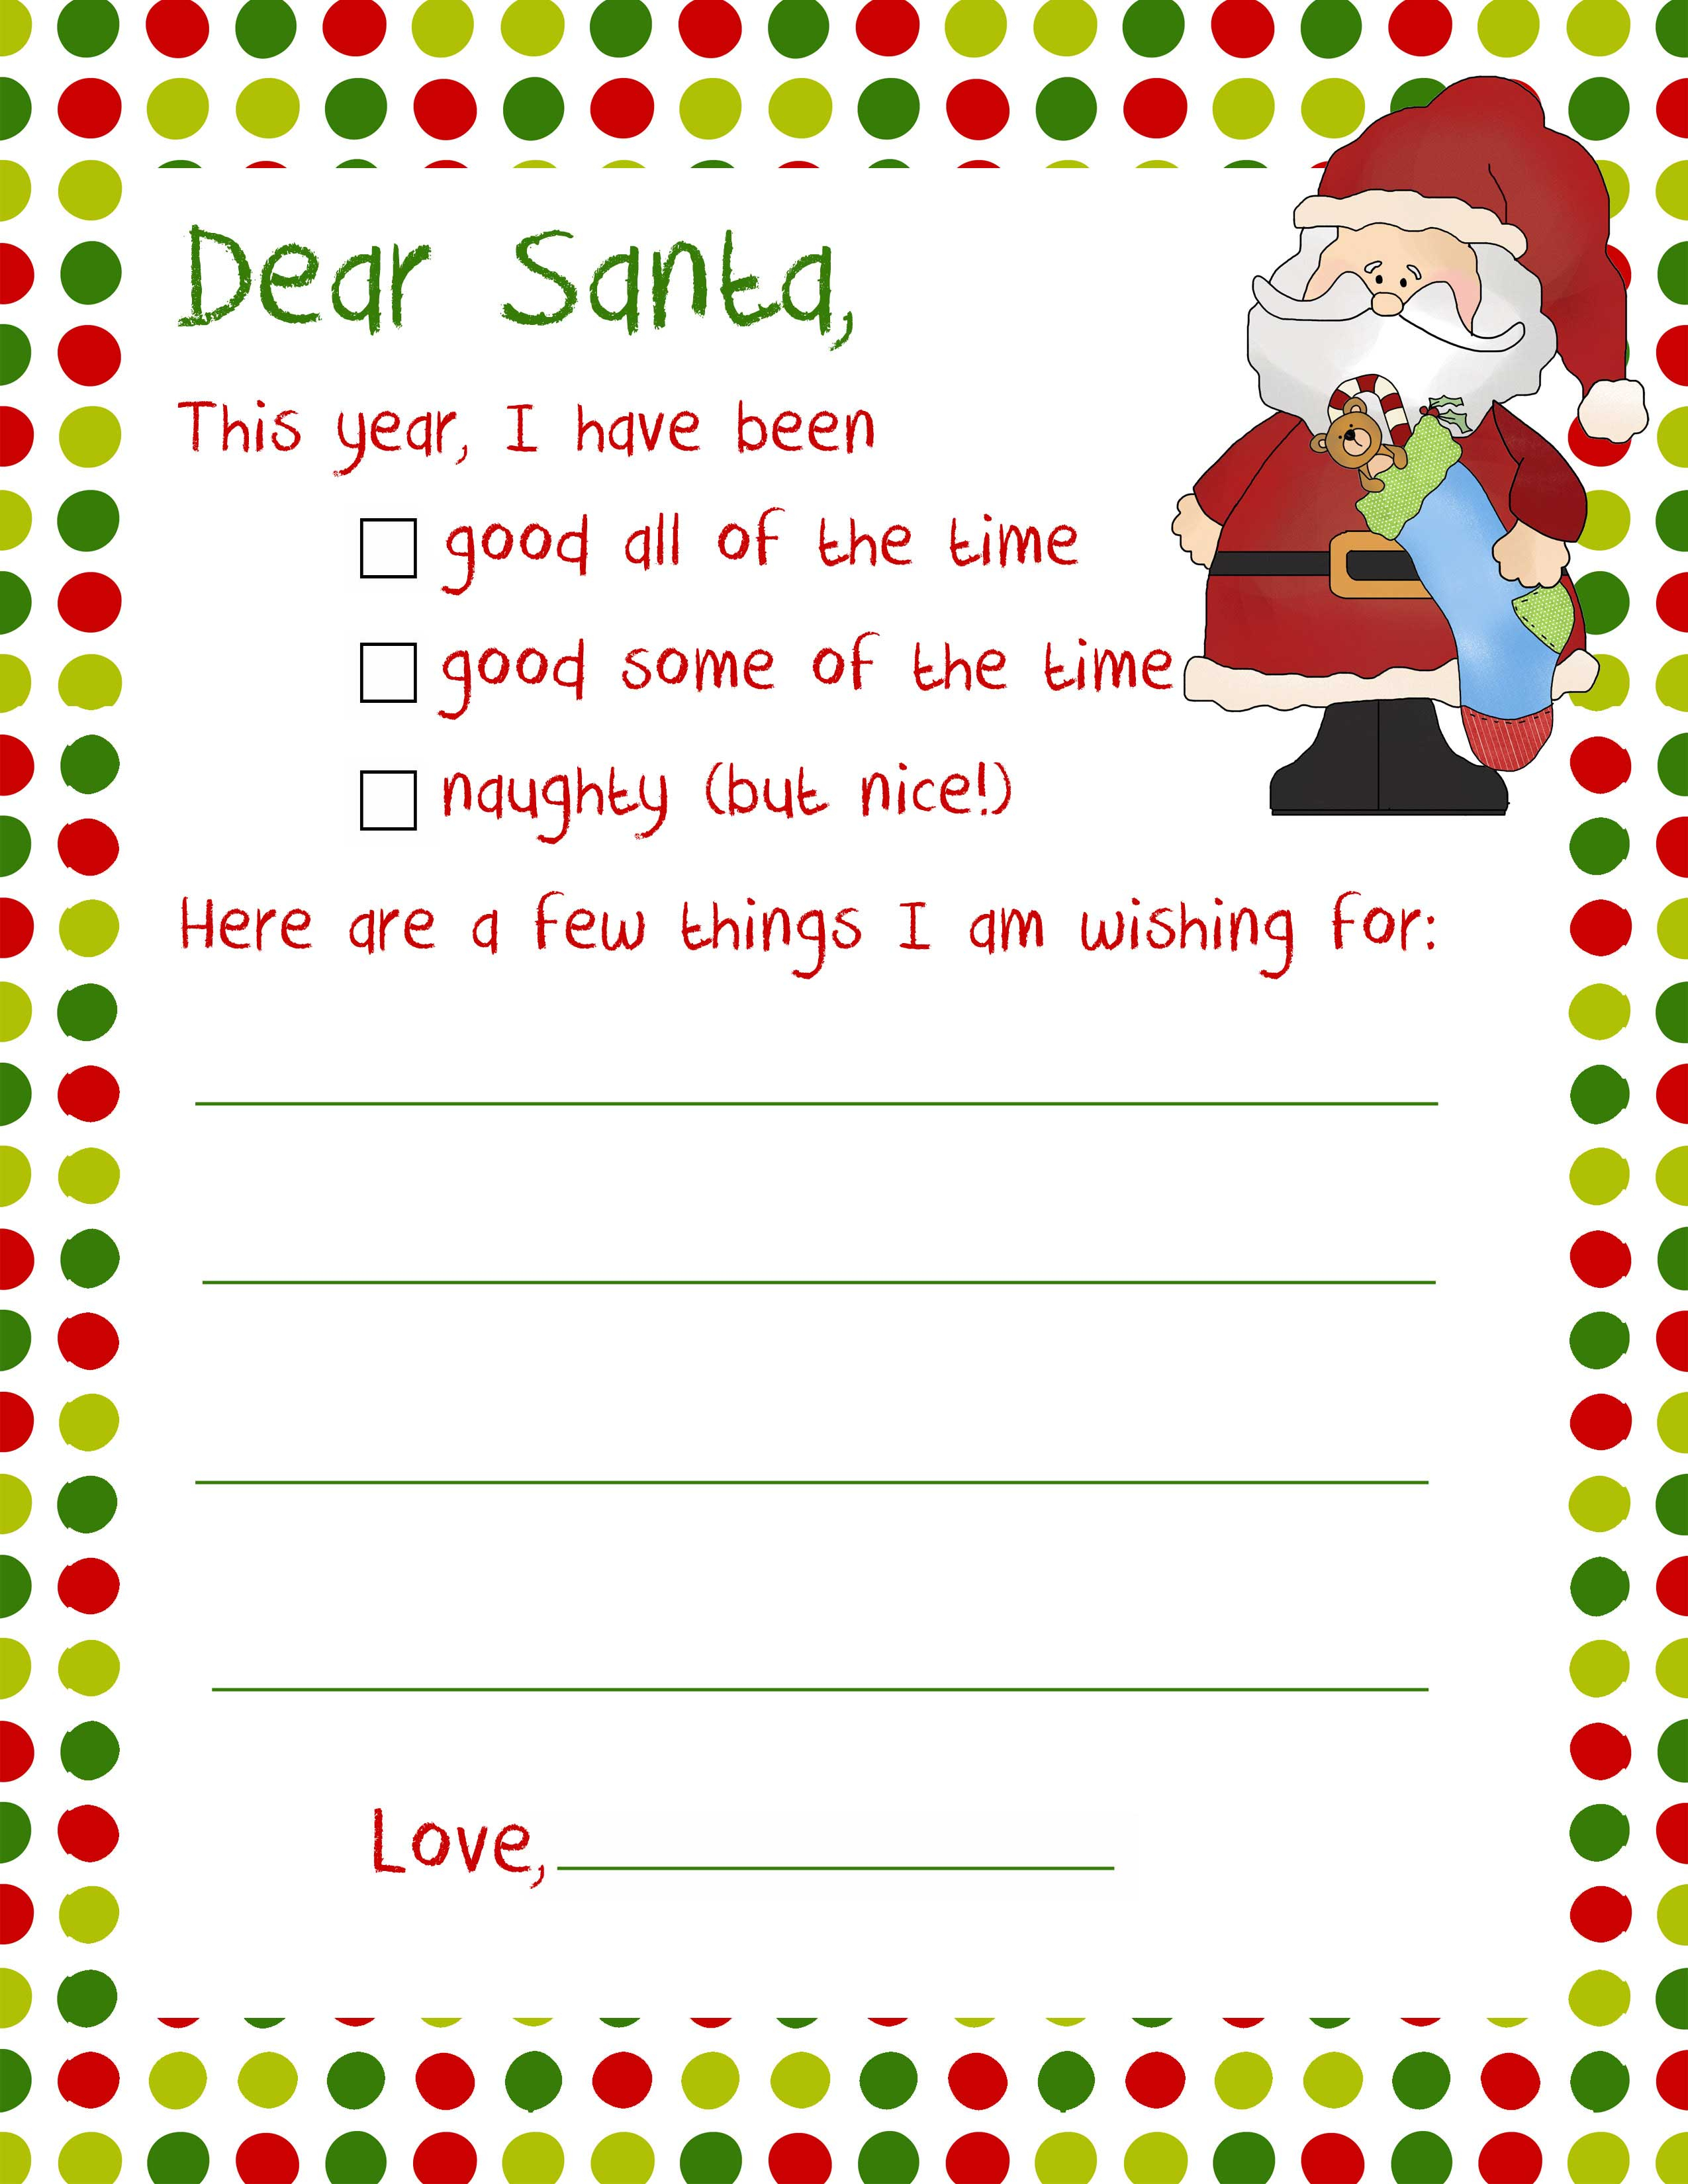 034 Santa Letter Letters From Template Archaicawful Ideas Regarding Santa Letter Template Word